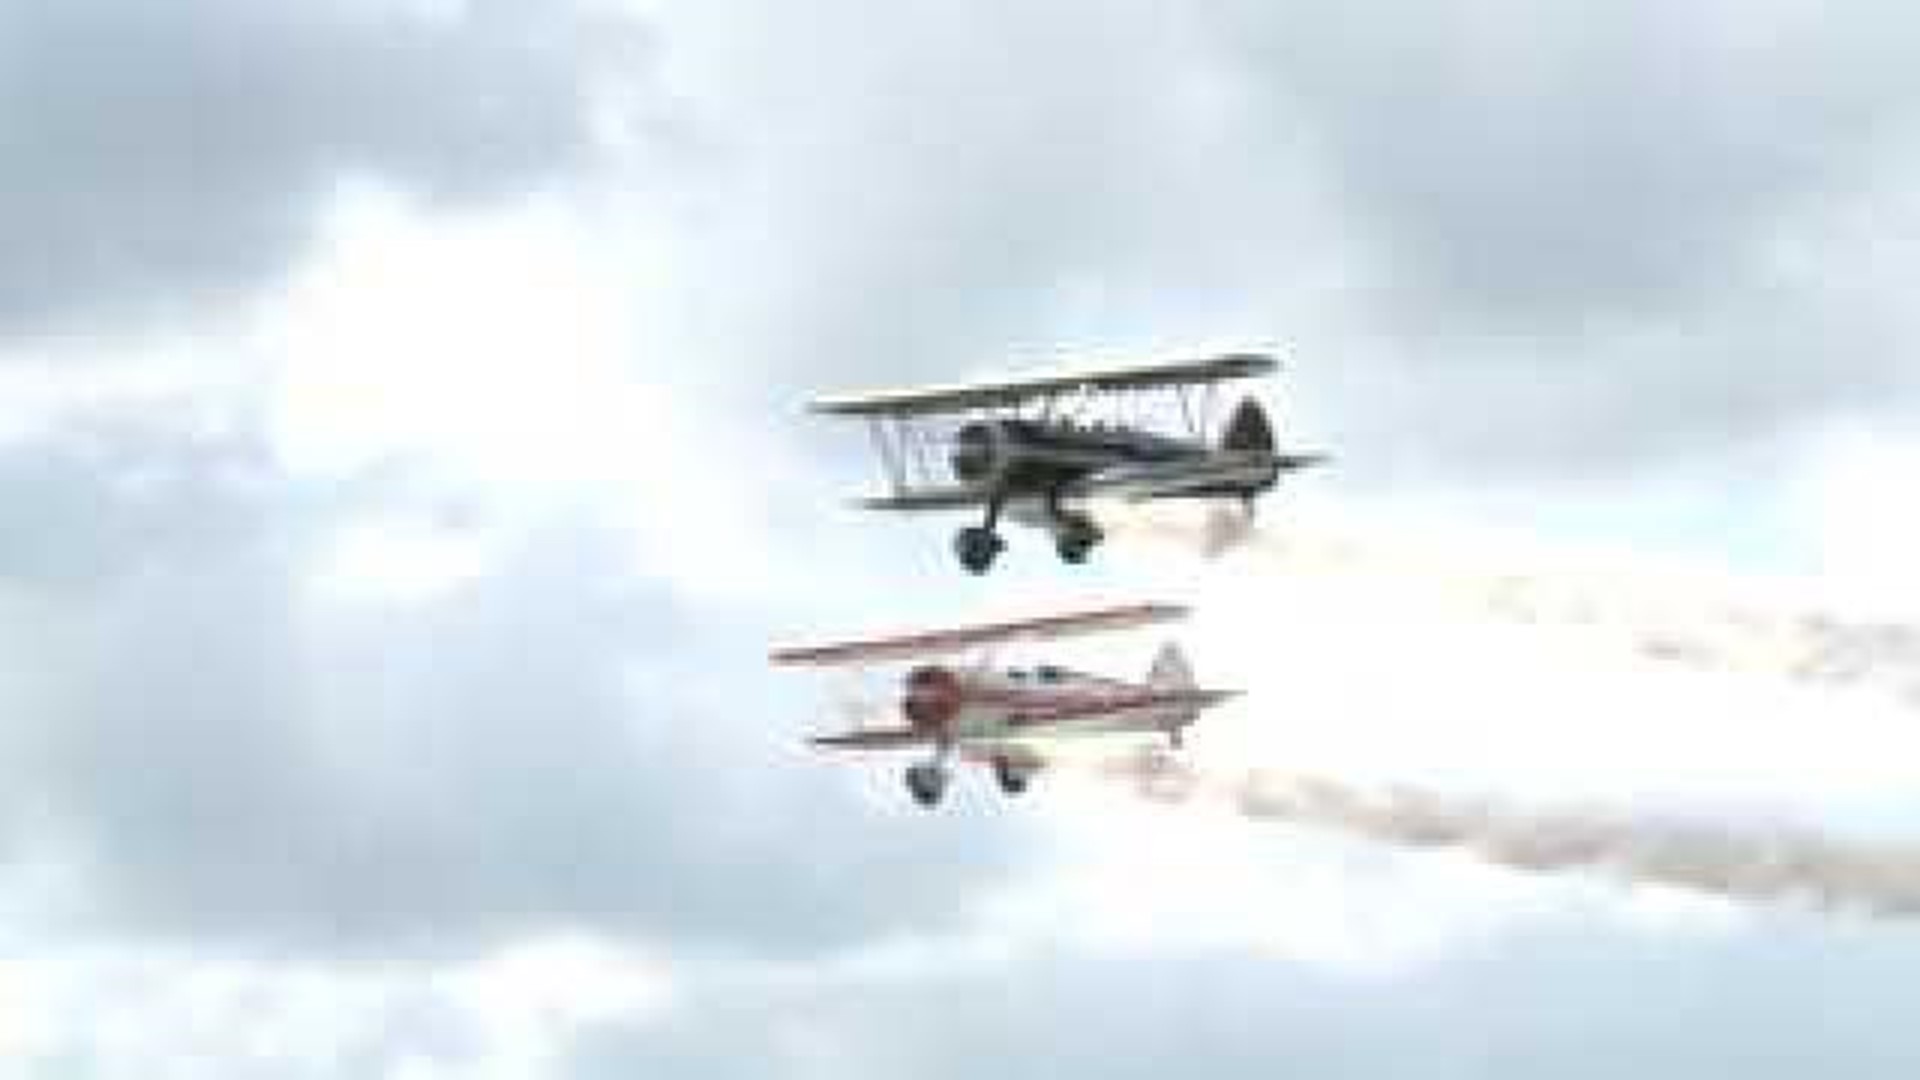 Stearman fly in to Galesburg